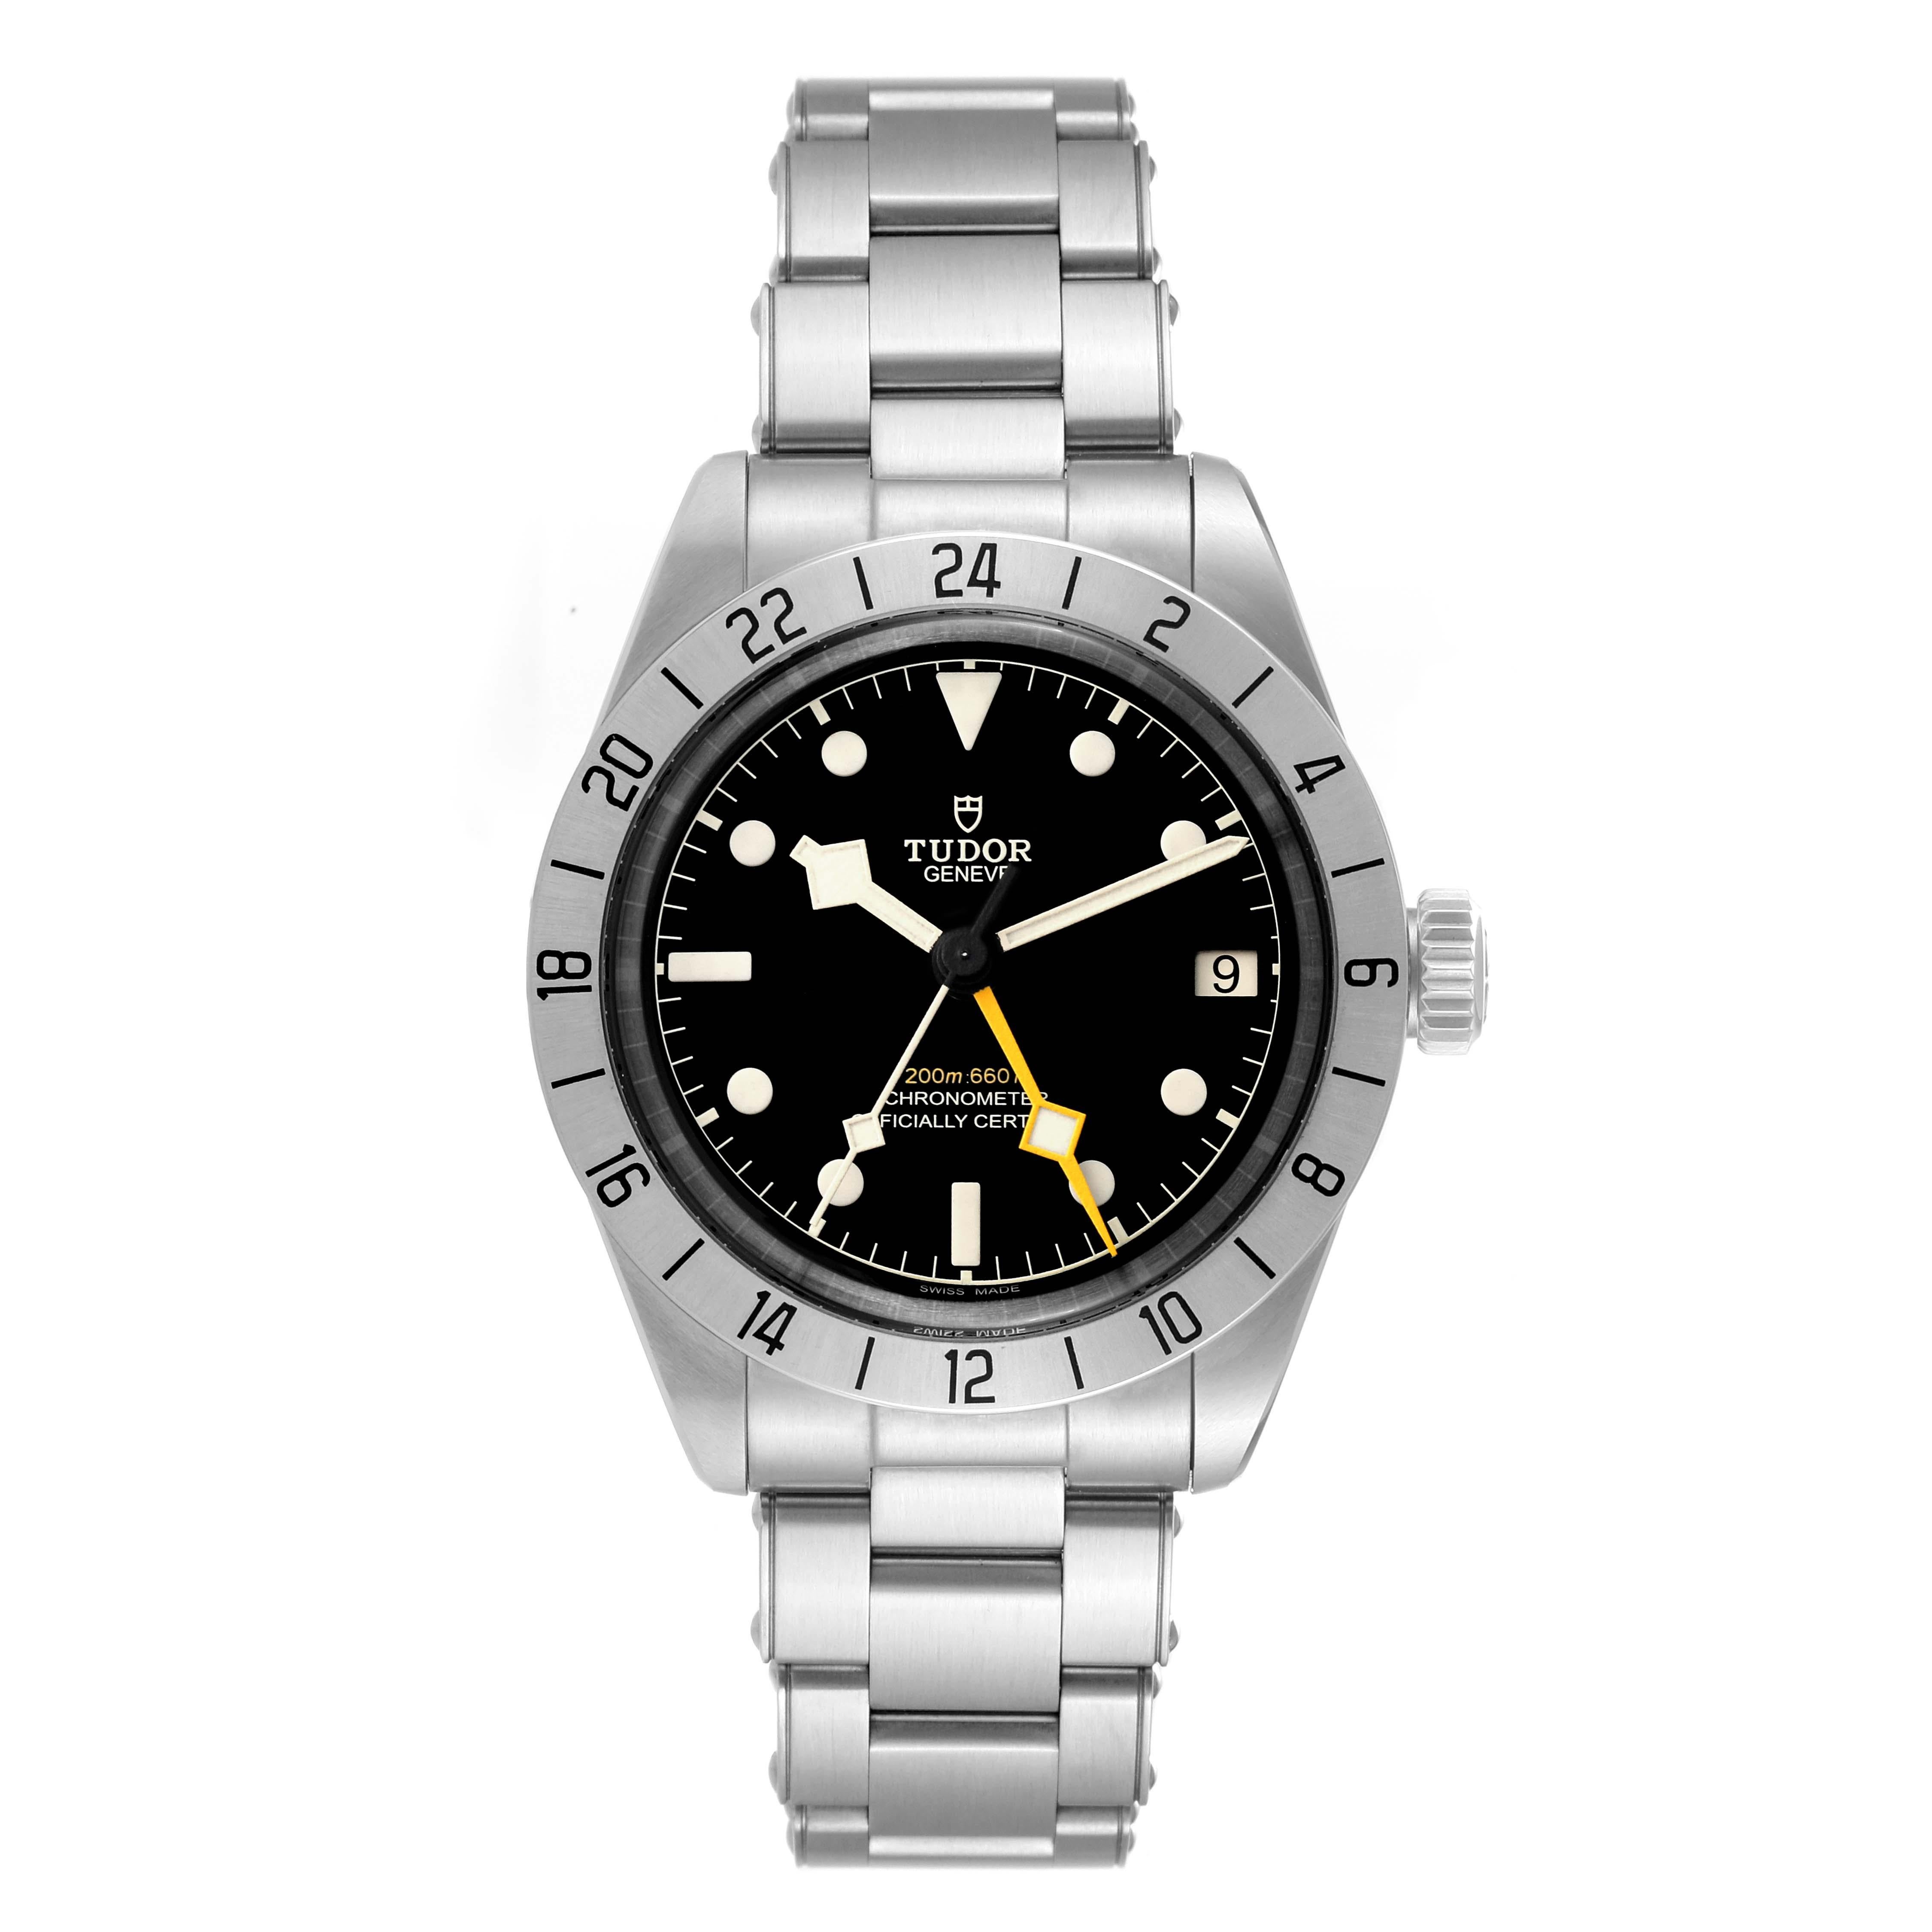 Tudor Black Bay Pro GMT Steel Mens Watch M79470 Unworn. Automatic self-winding movement. Stainless steel case 39.0 mm in diameter. Stainless steel 24 hour graduated bezel with satin finish. Scratch resistant sapphire crystal. Black dial with